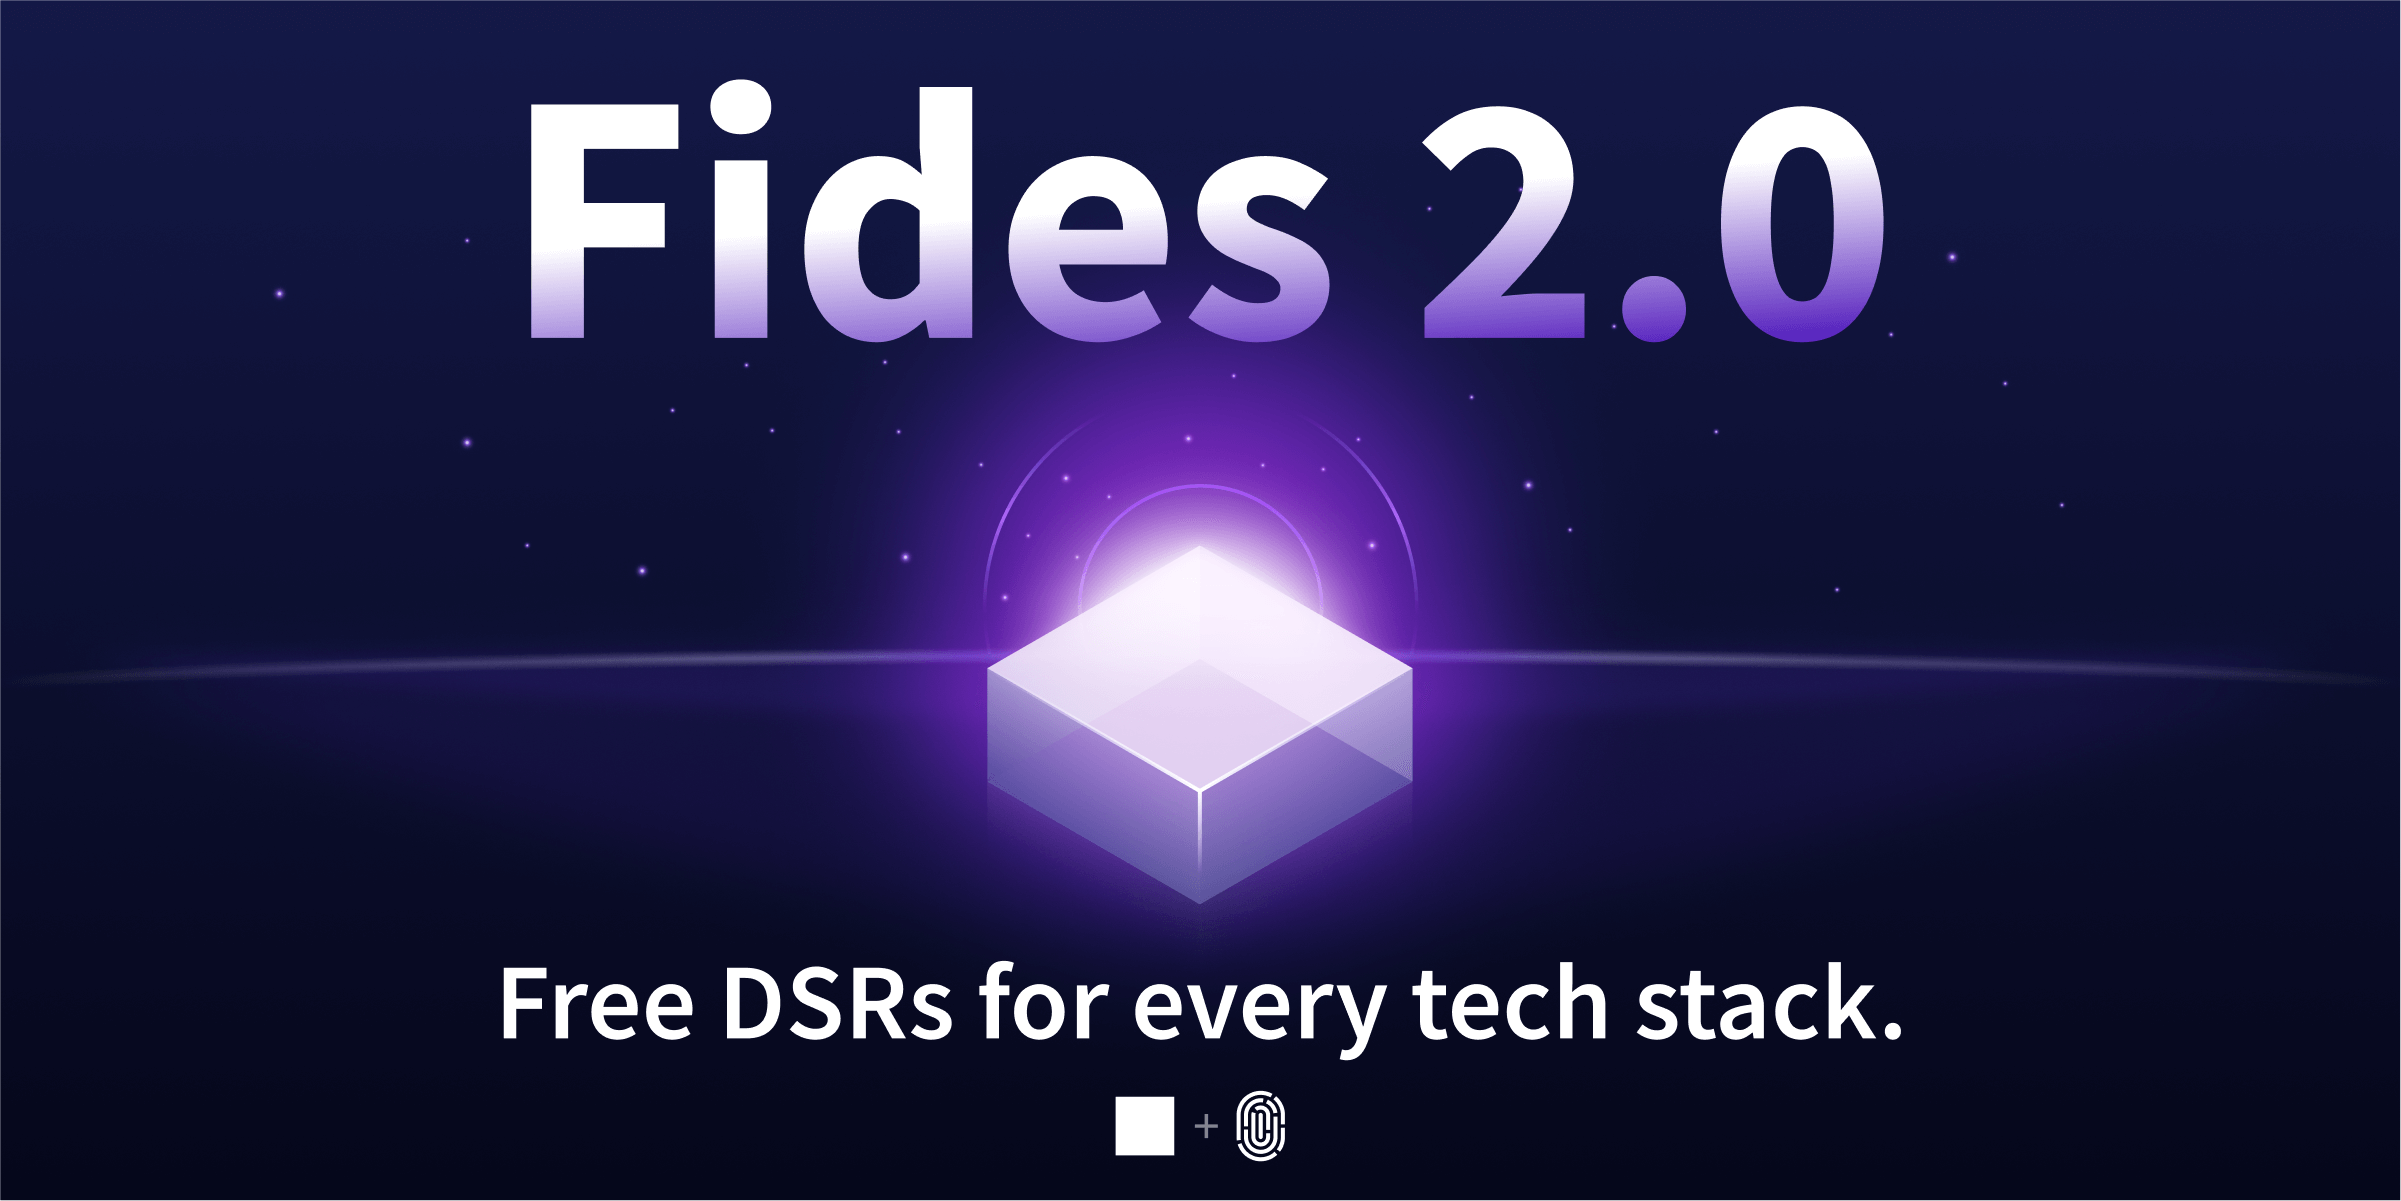 Free DSRs with Fides 2.0